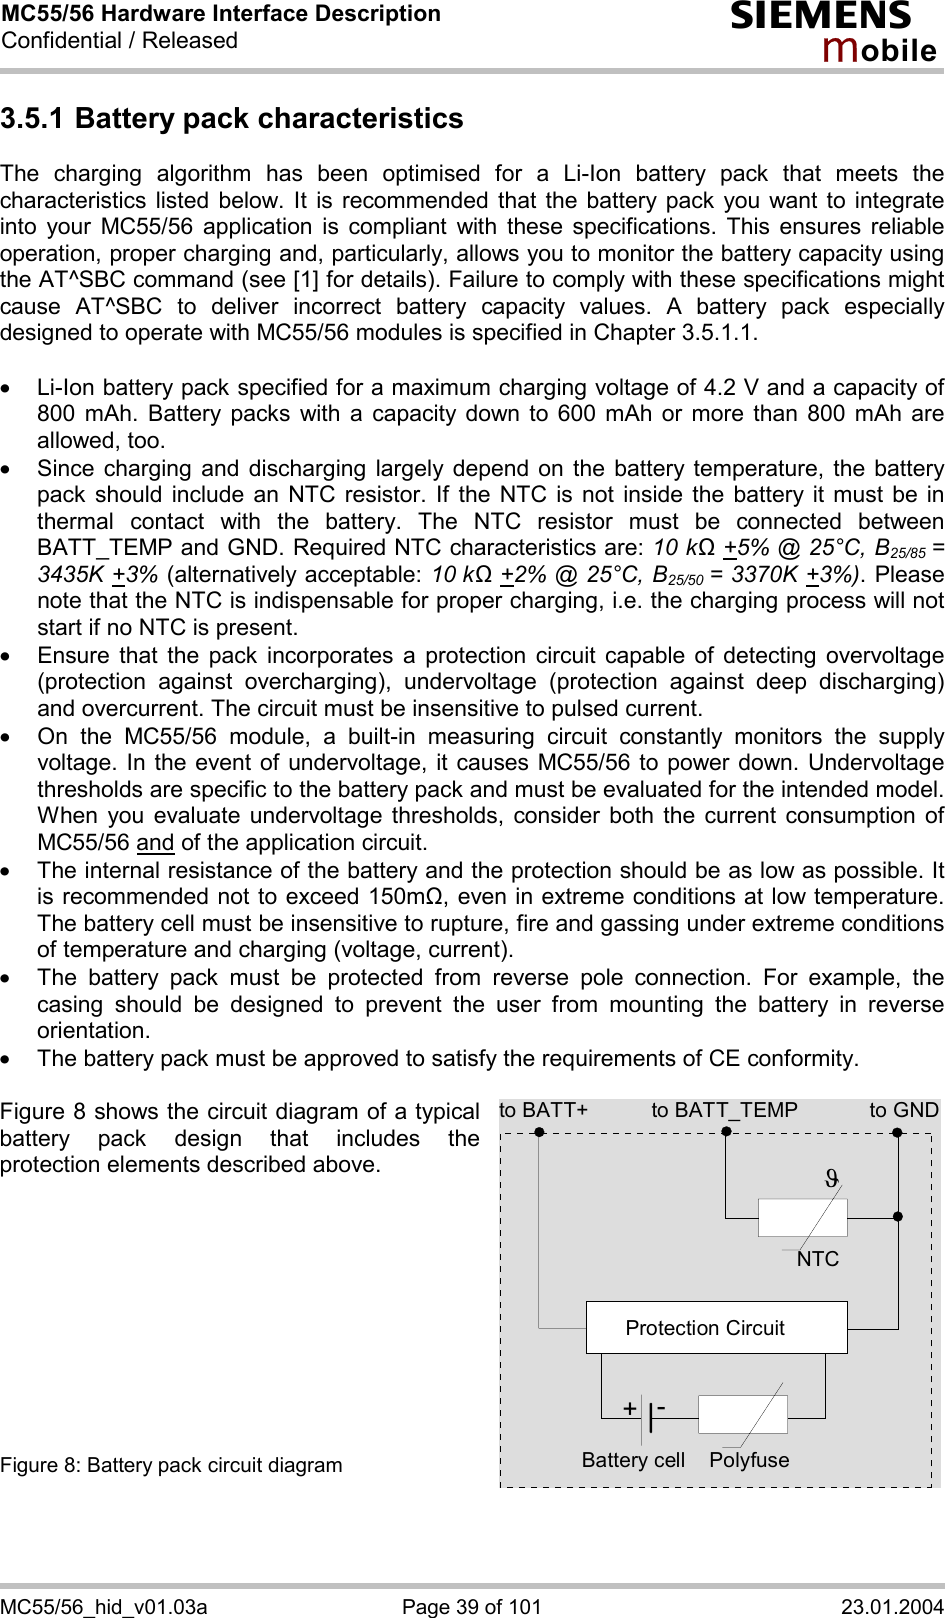 MC55/56 Hardware Interface Description Confidential / Released s mo b i l e MC55/56_hid_v01.03a  Page 39 of 101  23.01.2004 3.5.1 Battery pack characteristics The charging algorithm has been optimised for a Li-Ion battery pack that meets the characteristics listed below. It is recommended that the battery pack you want to integrate into your MC55/56 application is compliant with these specifications. This ensures reliable operation, proper charging and, particularly, allows you to monitor the battery capacity using the AT^SBC command (see [1] for details). Failure to comply with these specifications might cause AT^SBC to deliver incorrect battery capacity values. A battery pack especially designed to operate with MC55/56 modules is specified in Chapter 3.5.1.1.  ·  Li-Ion battery pack specified for a maximum charging voltage of 4.2 V and a capacity of 800 mAh. Battery packs with a capacity down to 600 mAh or more than 800 mAh are allowed, too. ·  Since charging and discharging largely depend on the battery temperature, the battery pack should include an NTC resistor. If the NTC is not inside the battery it must be in thermal contact with the battery. The NTC resistor must be connected between BATT_TEMP and GND. Required NTC characteristics are: 10 kΩ +5% @ 25°C, B25/85  = 3435K +3% (alternatively acceptable: 10 kΩ +2% @ 25°C, B25/50  = 3370K +3%). Please note that the NTC is indispensable for proper charging, i.e. the charging process will not start if no NTC is present. ·  Ensure that the pack incorporates a protection circuit capable of detecting overvoltage (protection against overcharging), undervoltage (protection against deep discharging) and overcurrent. The circuit must be insensitive to pulsed current. ·  On the MC55/56 module, a built-in measuring circuit constantly monitors the supply voltage. In the event of undervoltage, it causes MC55/56 to power down. Undervoltage thresholds are specific to the battery pack and must be evaluated for the intended model. When you evaluate undervoltage thresholds, consider both the current consumption of MC55/56 and of the application circuit.  ·  The internal resistance of the battery and the protection should be as low as possible. It is recommended not to exceed 150m&quot;, even in extreme conditions at low temperature. The battery cell must be insensitive to rupture, fire and gassing under extreme conditions of temperature and charging (voltage, current). ·  The battery pack must be protected from reverse pole connection. For example, the casing should be designed to prevent the user from mounting the battery in reverse orientation. ·  The battery pack must be approved to satisfy the requirements of CE conformity.  Figure 8 shows the circuit diagram of a typical battery pack design that includes the protection elements described above.           Figure 8: Battery pack circuit diagram to BATT_TEMP to GNDNTCPolyfuseJProtection Circuit+-Battery cellto BATT+